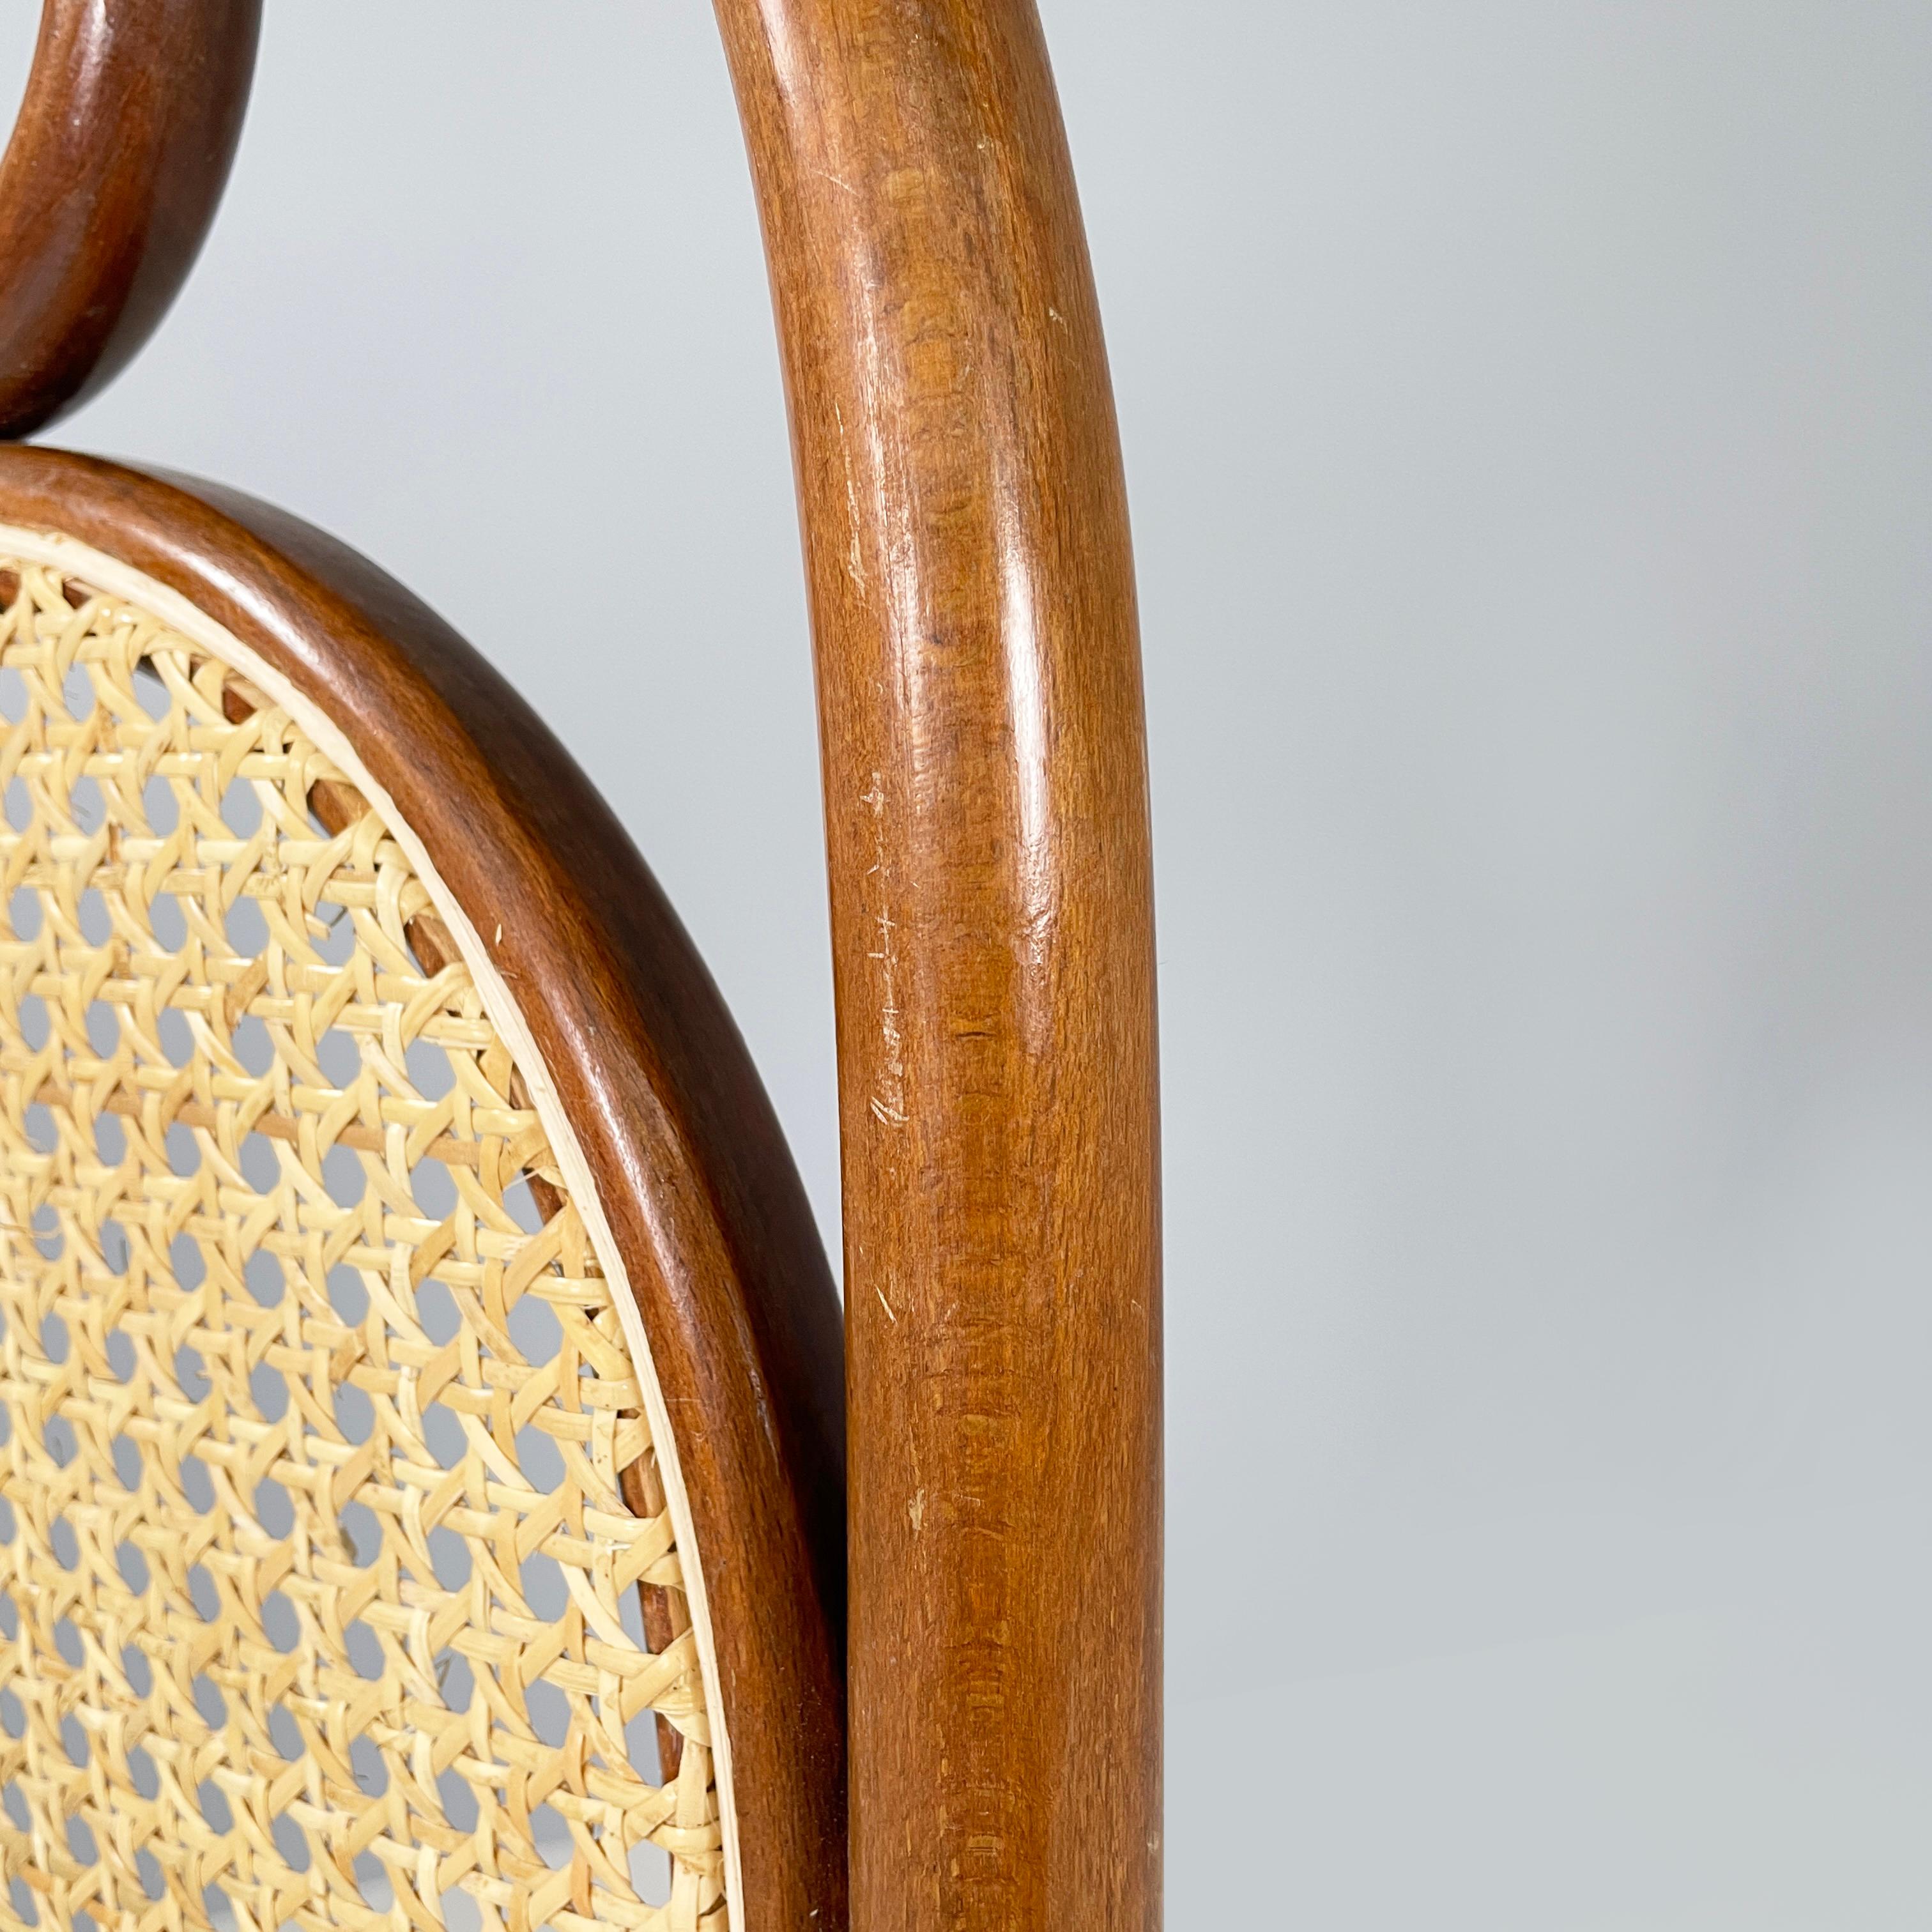 Italian Chair in straw and wood, 1900-1950s For Sale 4